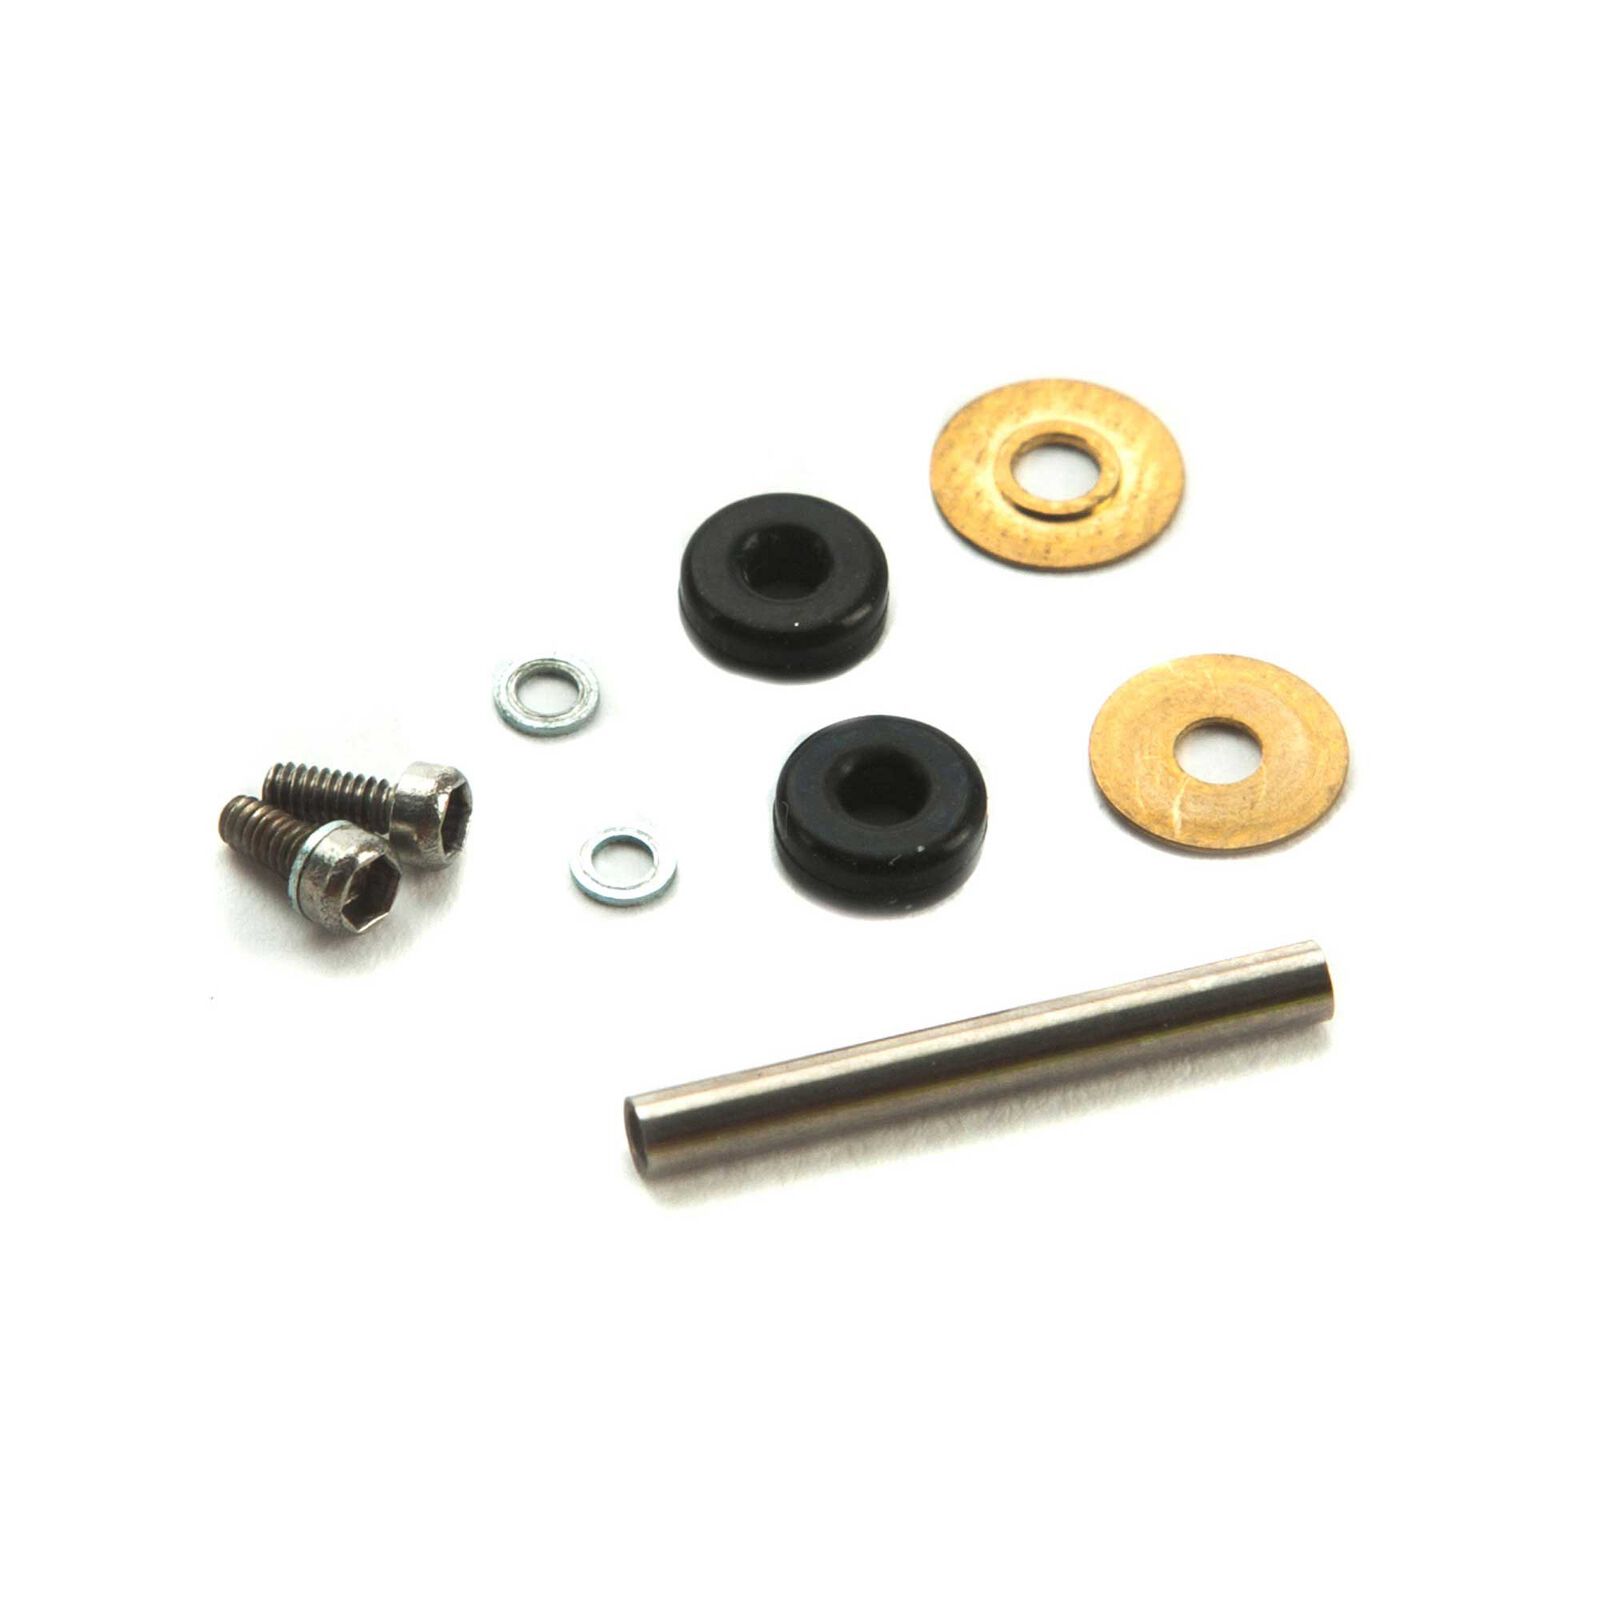 Feathering Spindle with O-Rings, Bushings, Hardwware: mCP X BL